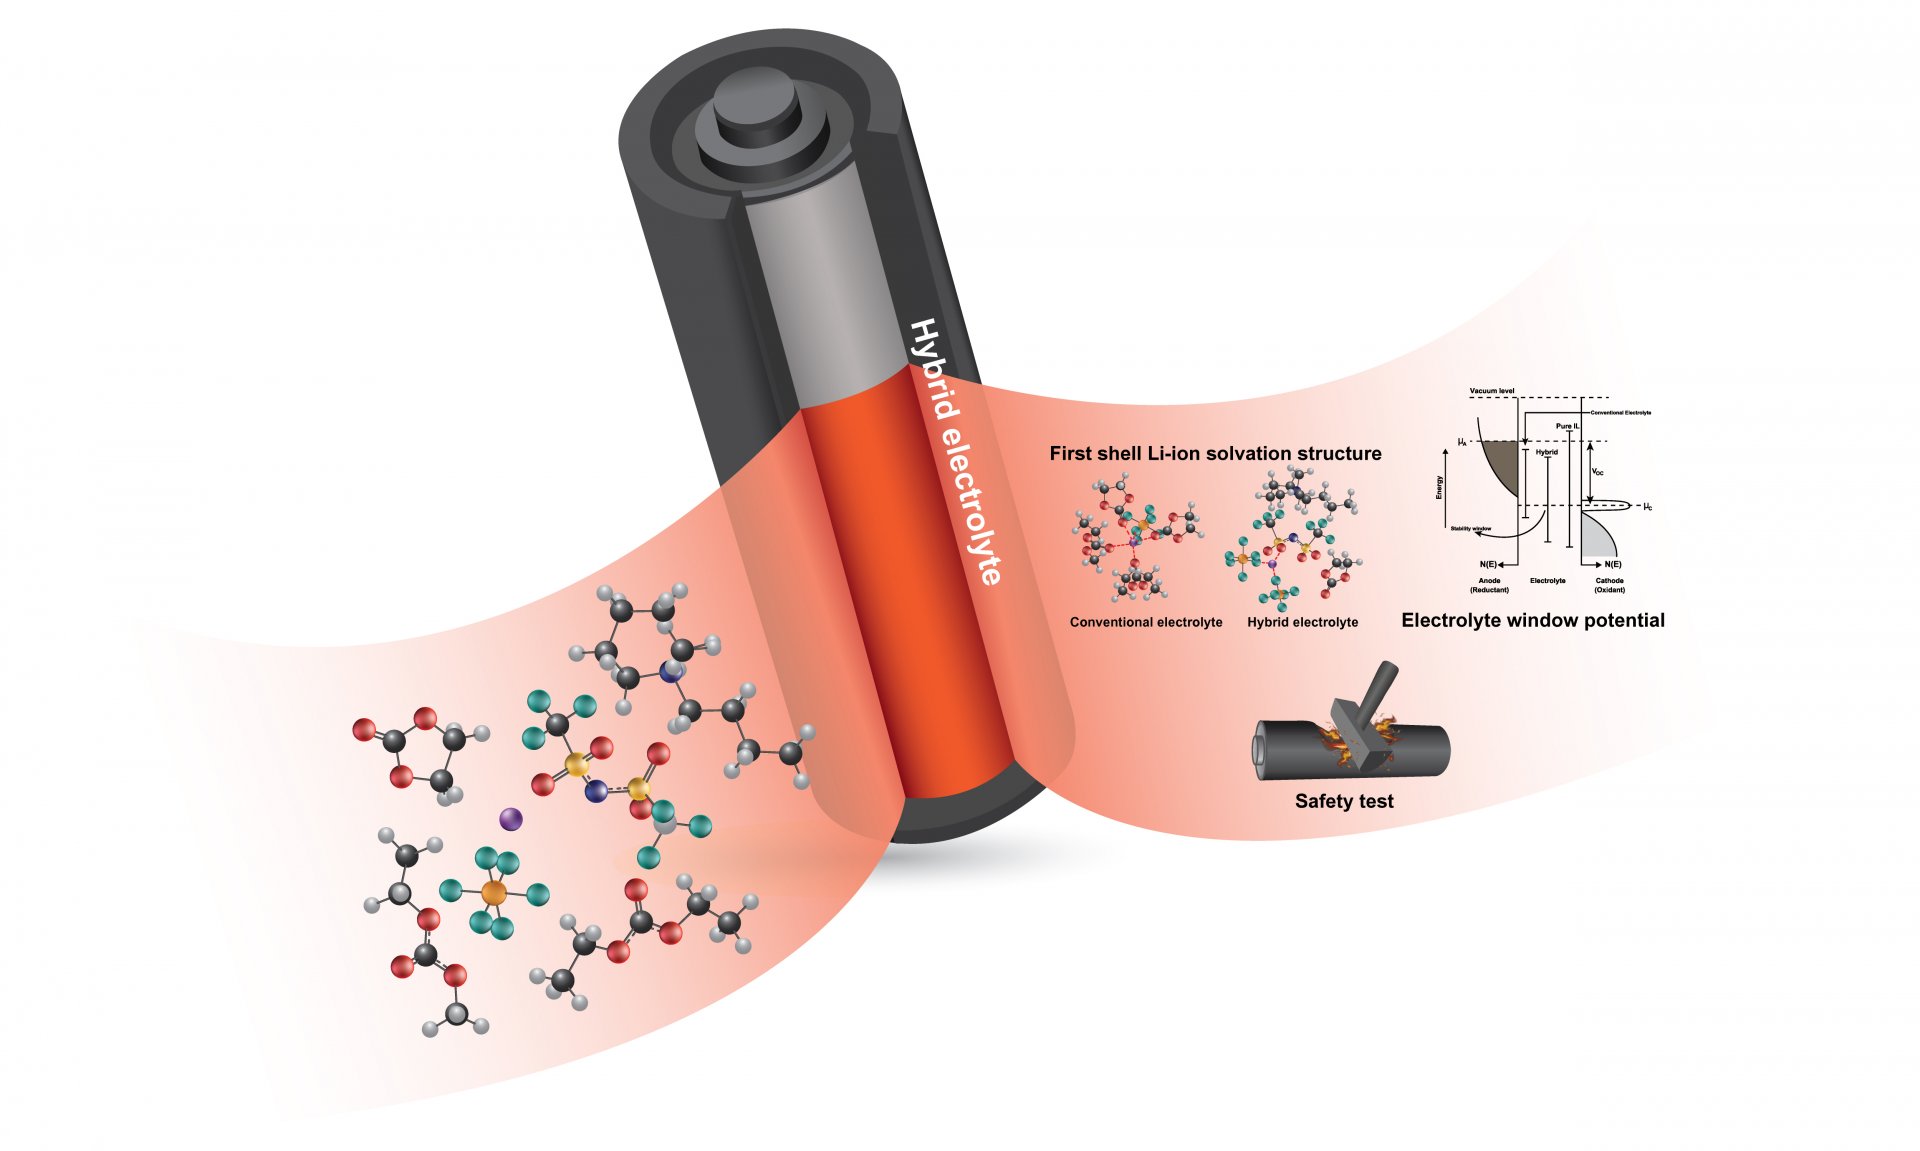 Free carbonate-based molecules in the electrolyte leading to severe safety concerns of Ni-rich Li-ion batteries